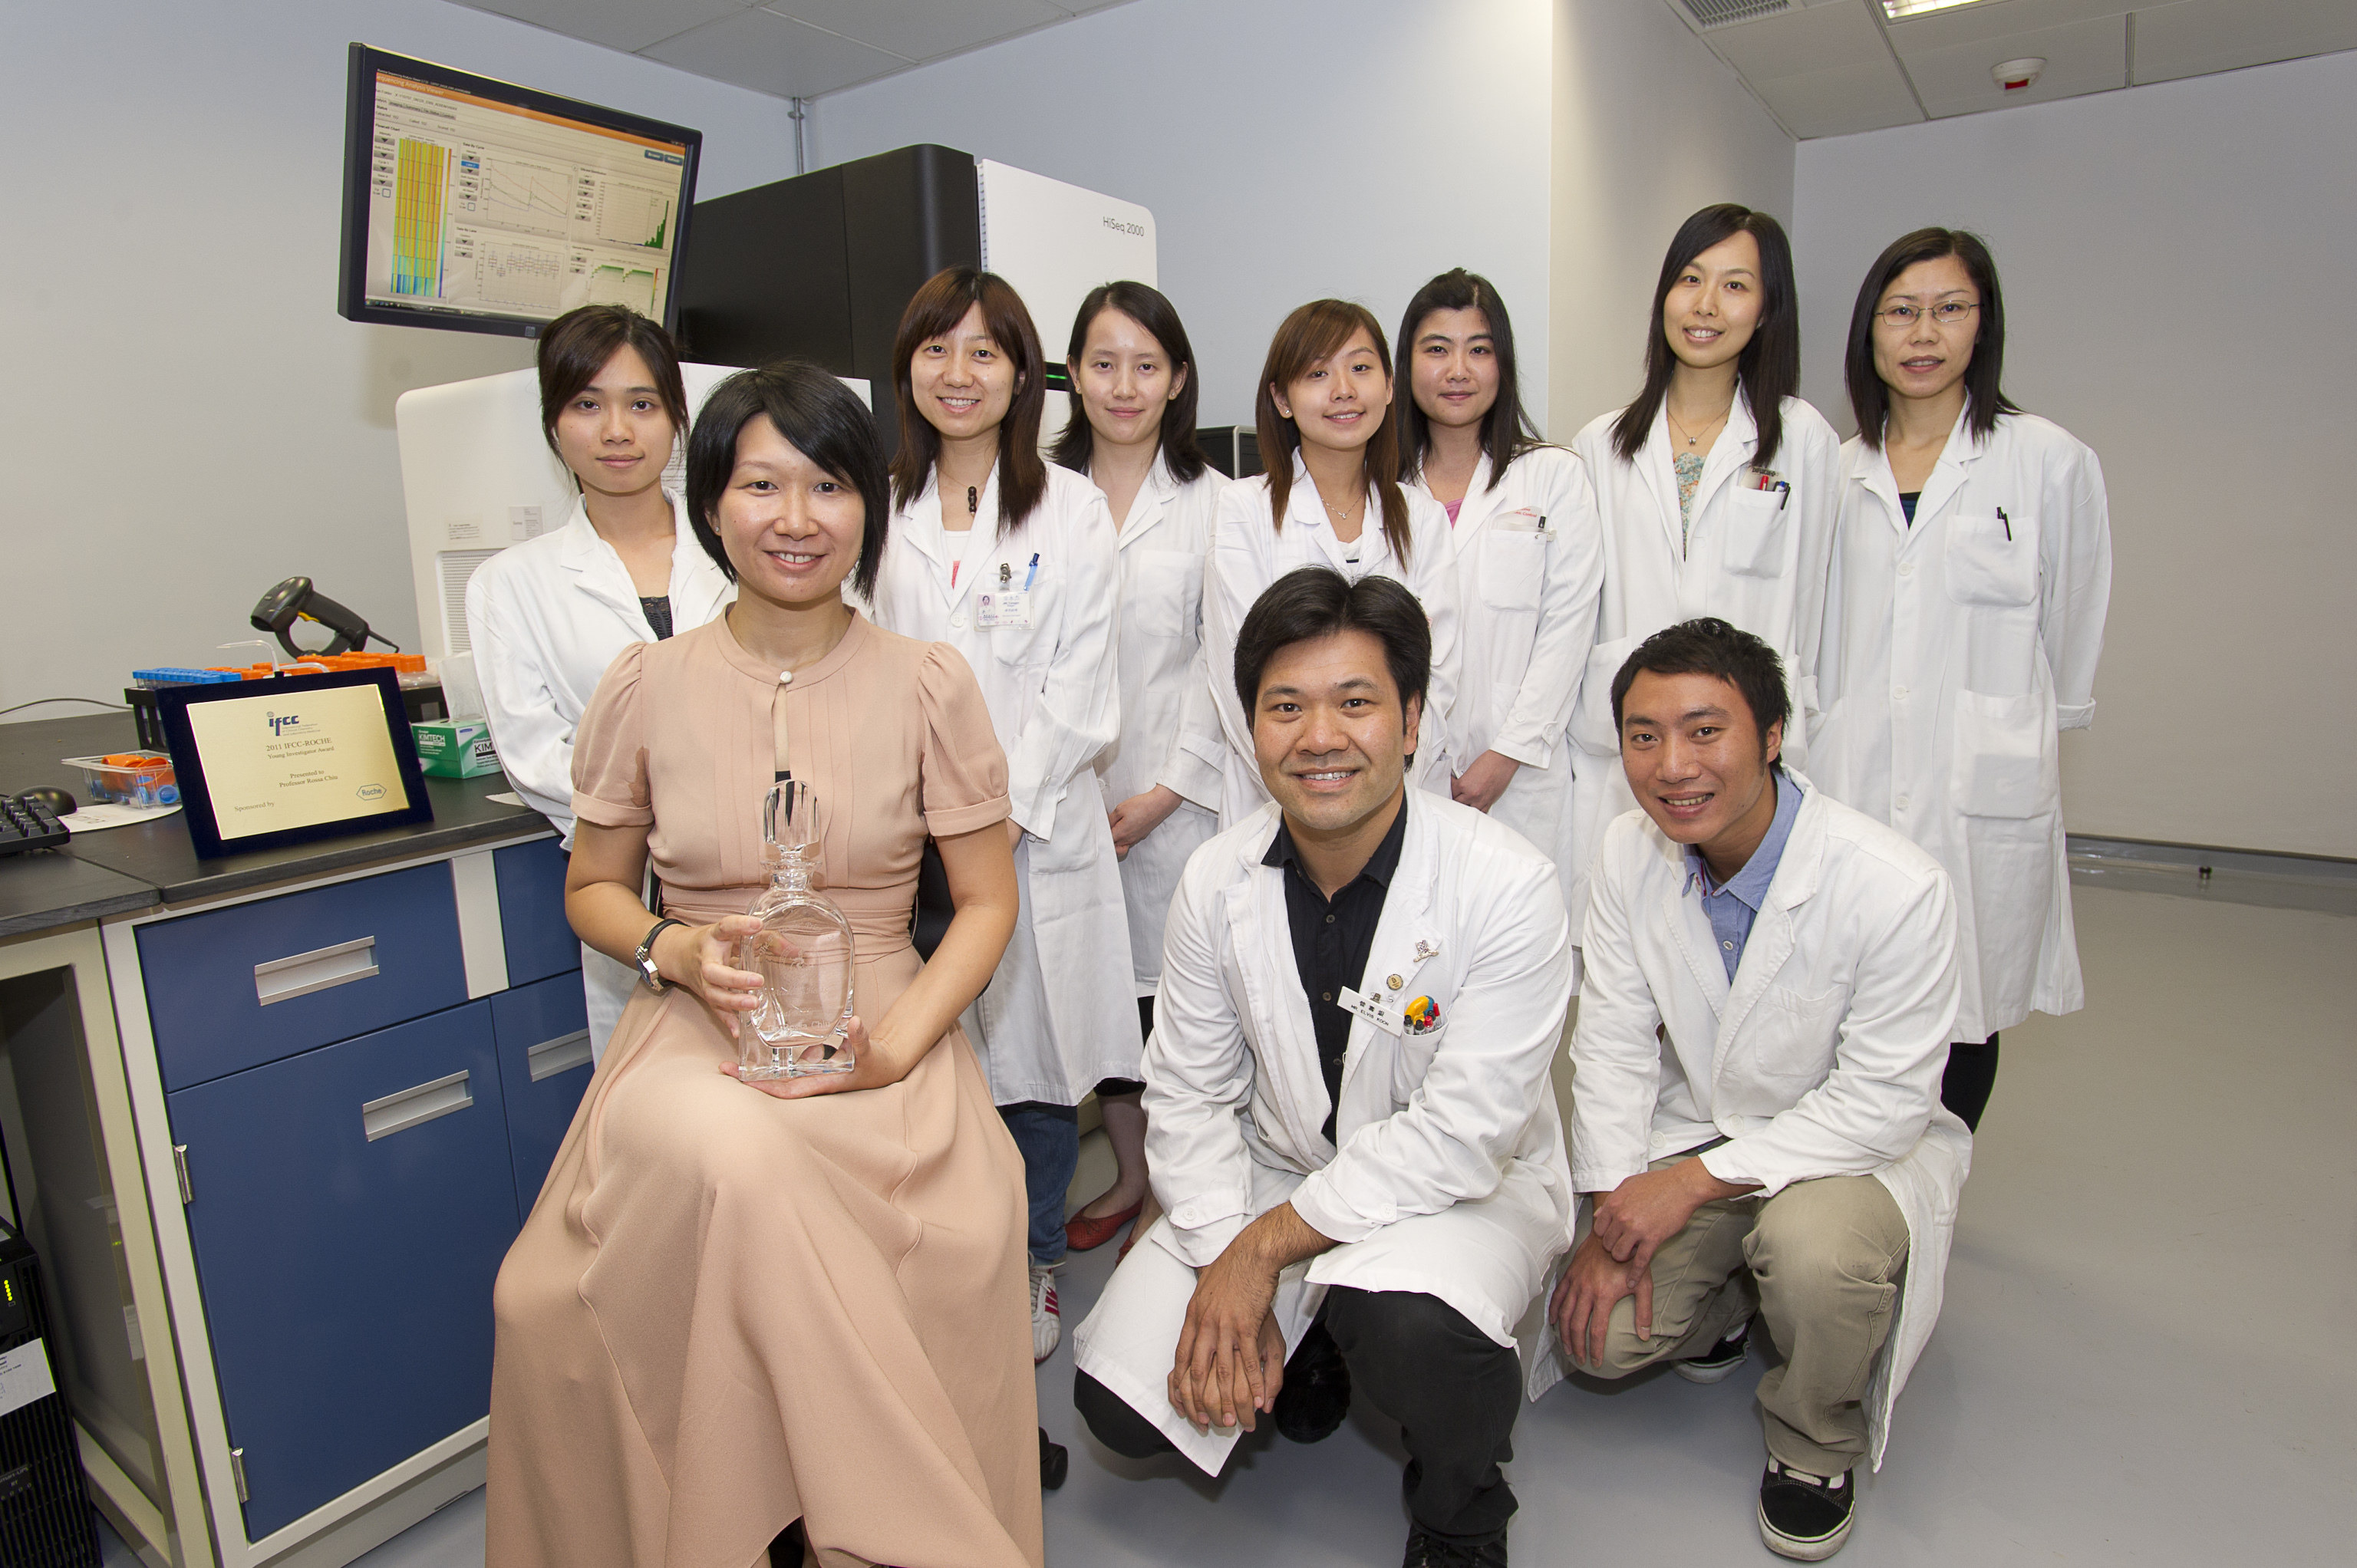 A group photo of Prof. Rossa Chiu (1st left, 1st row) with her research team